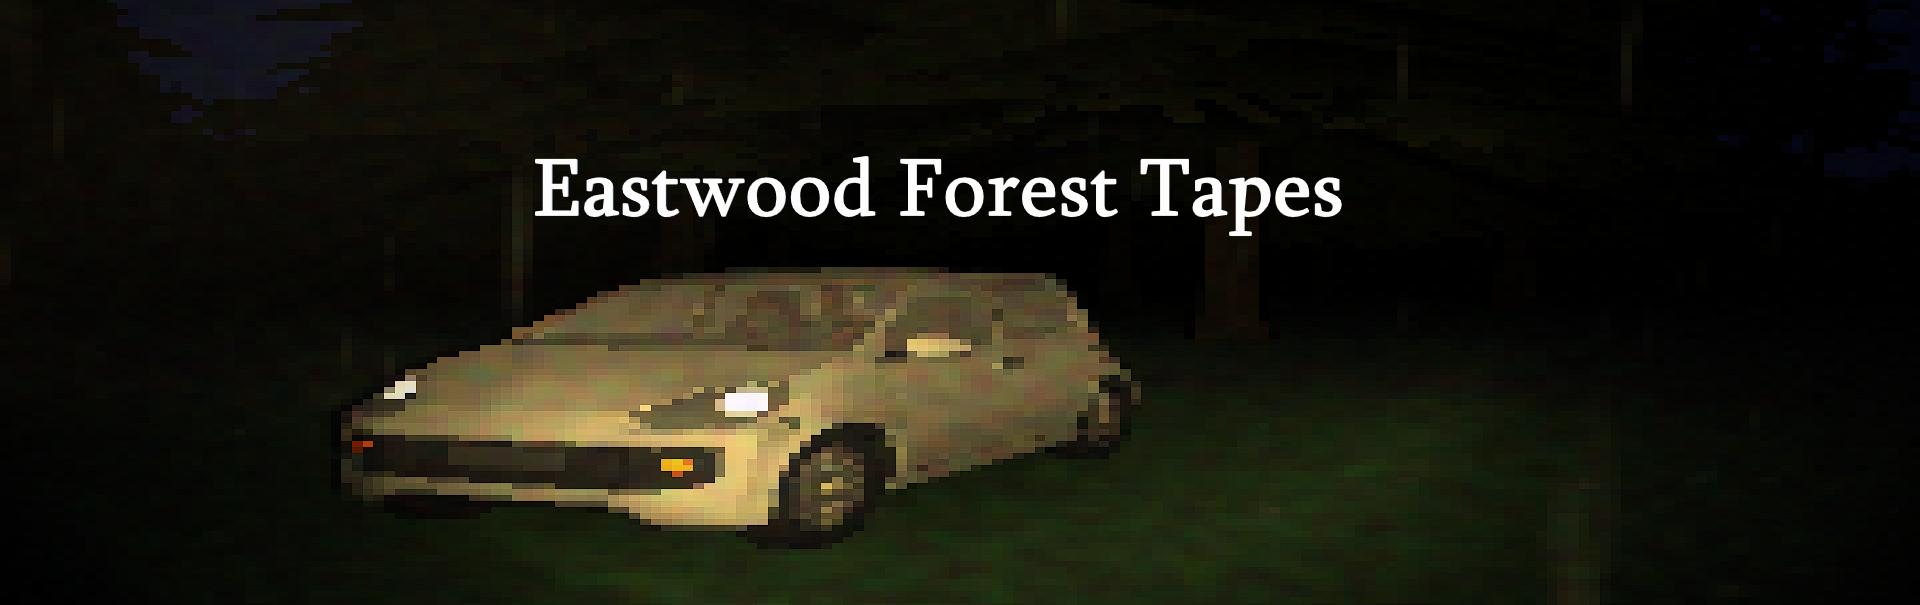 Eastwood Forest Tapes